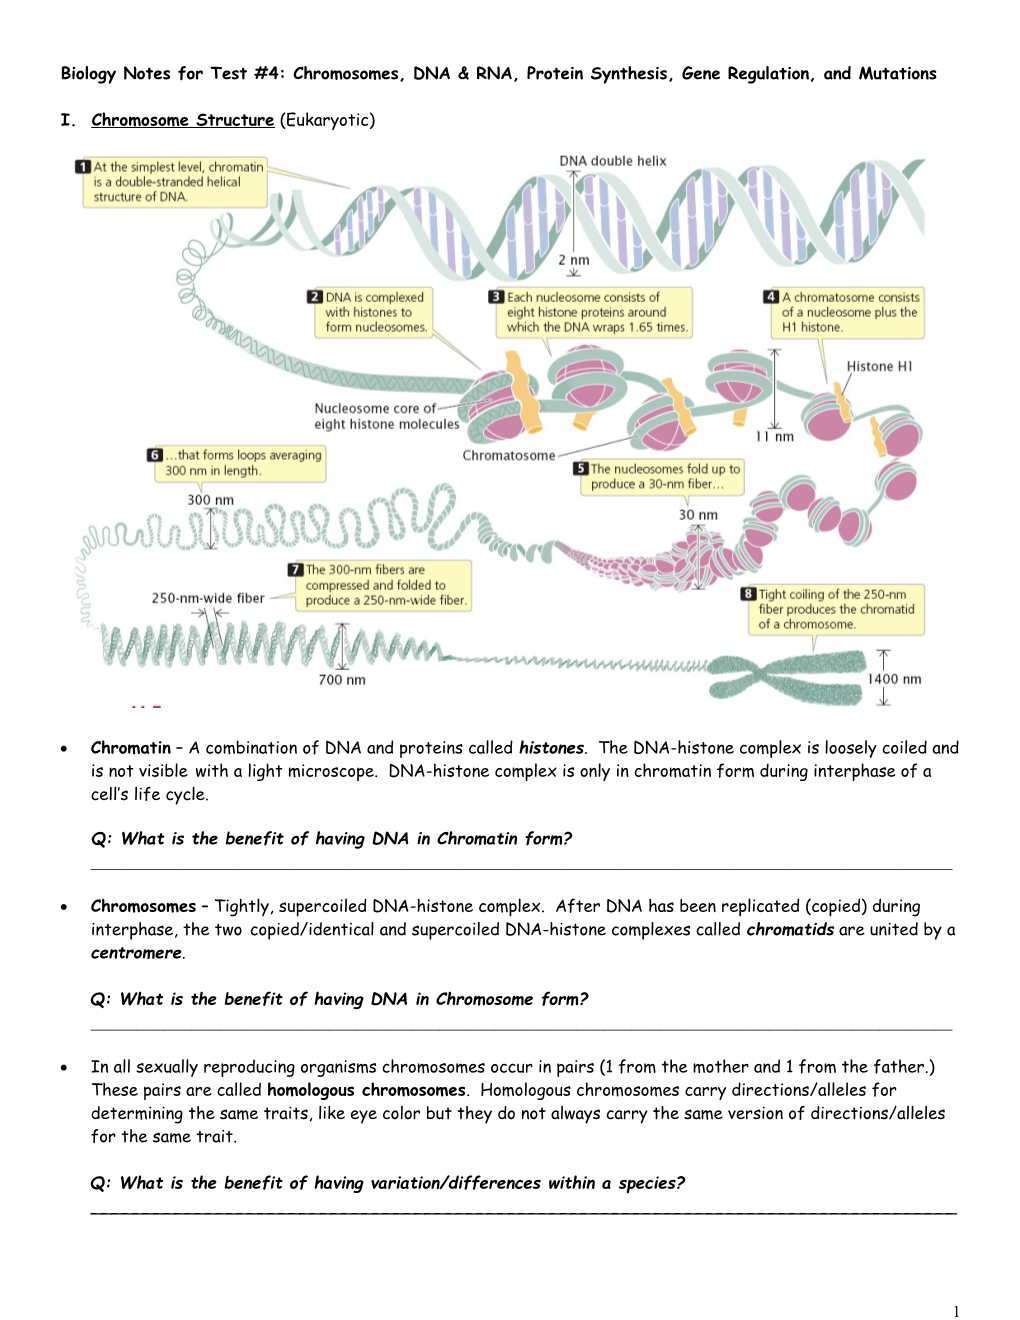 Biology Notes for Test #4: Chromosomes, DNA & RNA Structure, DNA Replication, Protein Synthesis